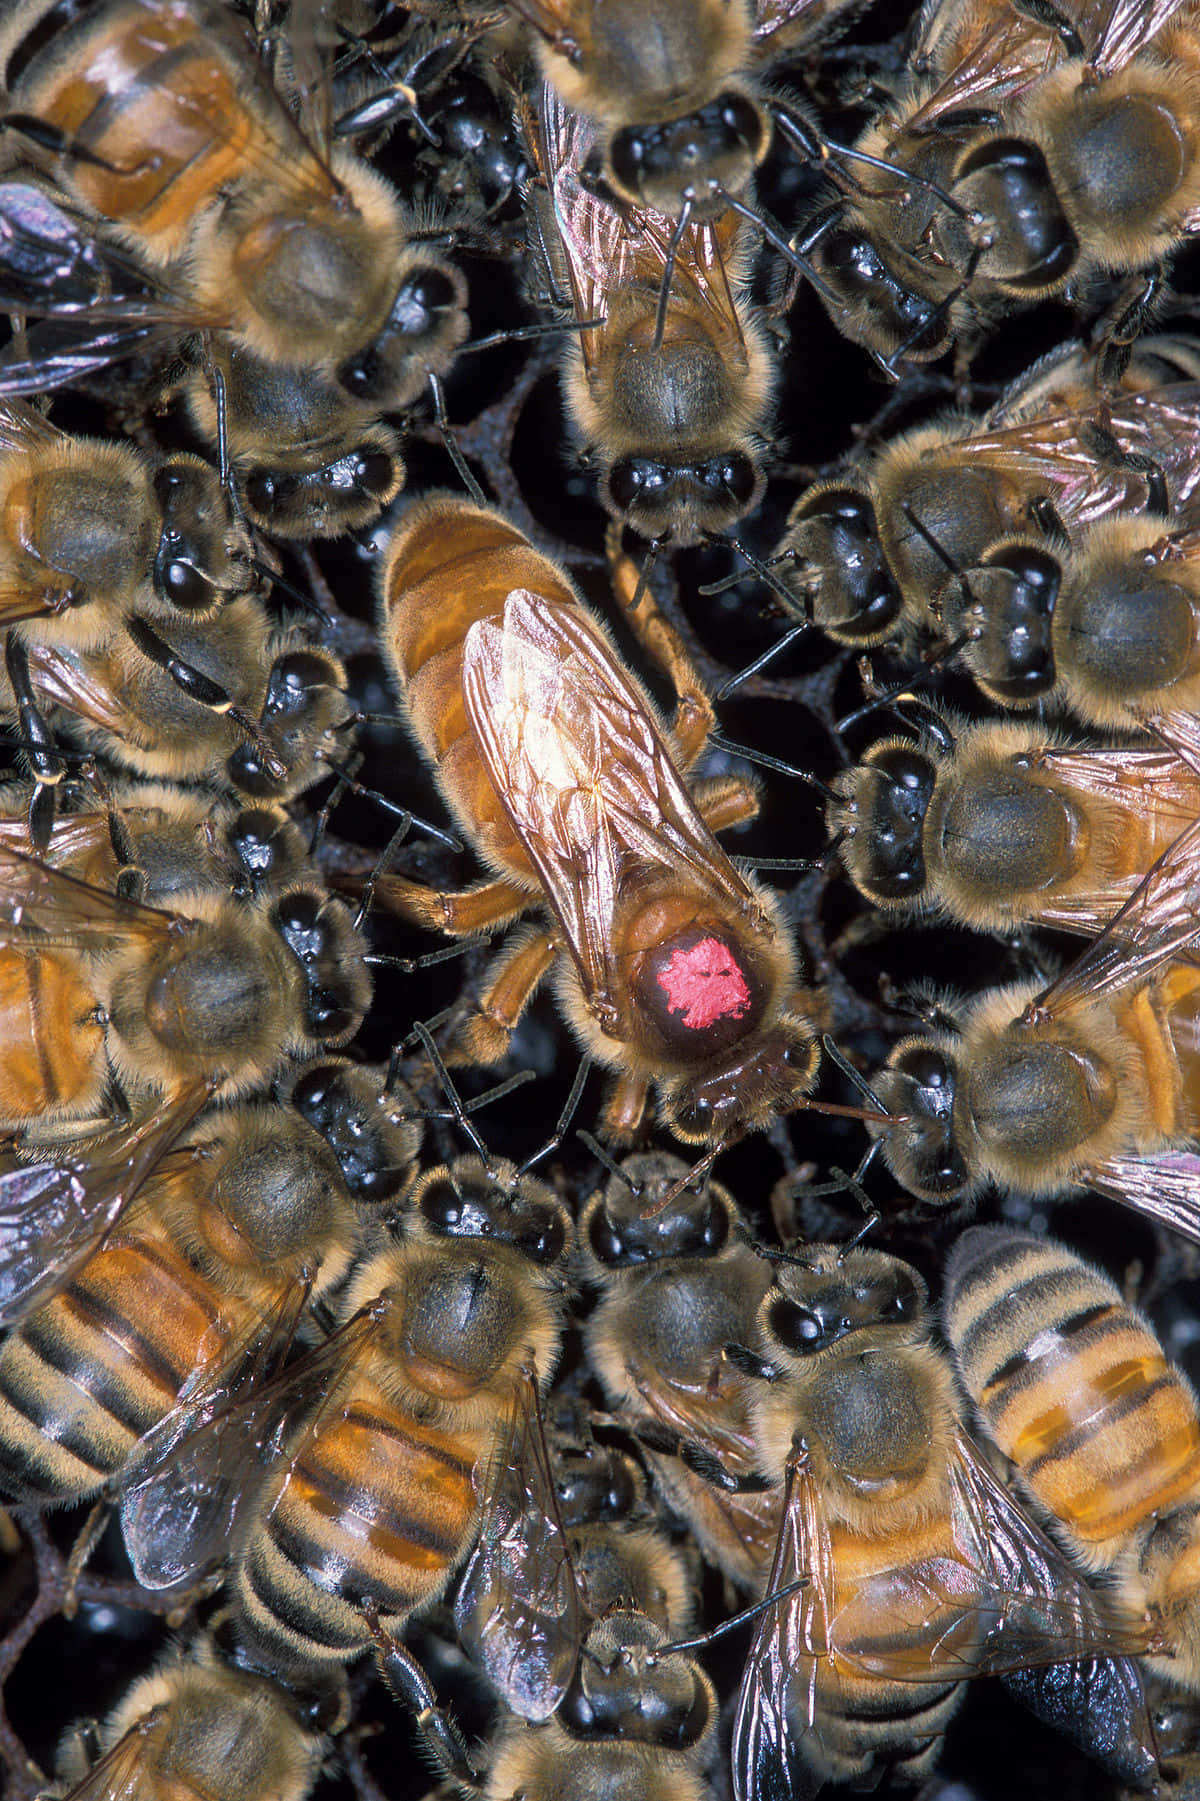 Queen Bee Crowded By Group Of Bees Picture